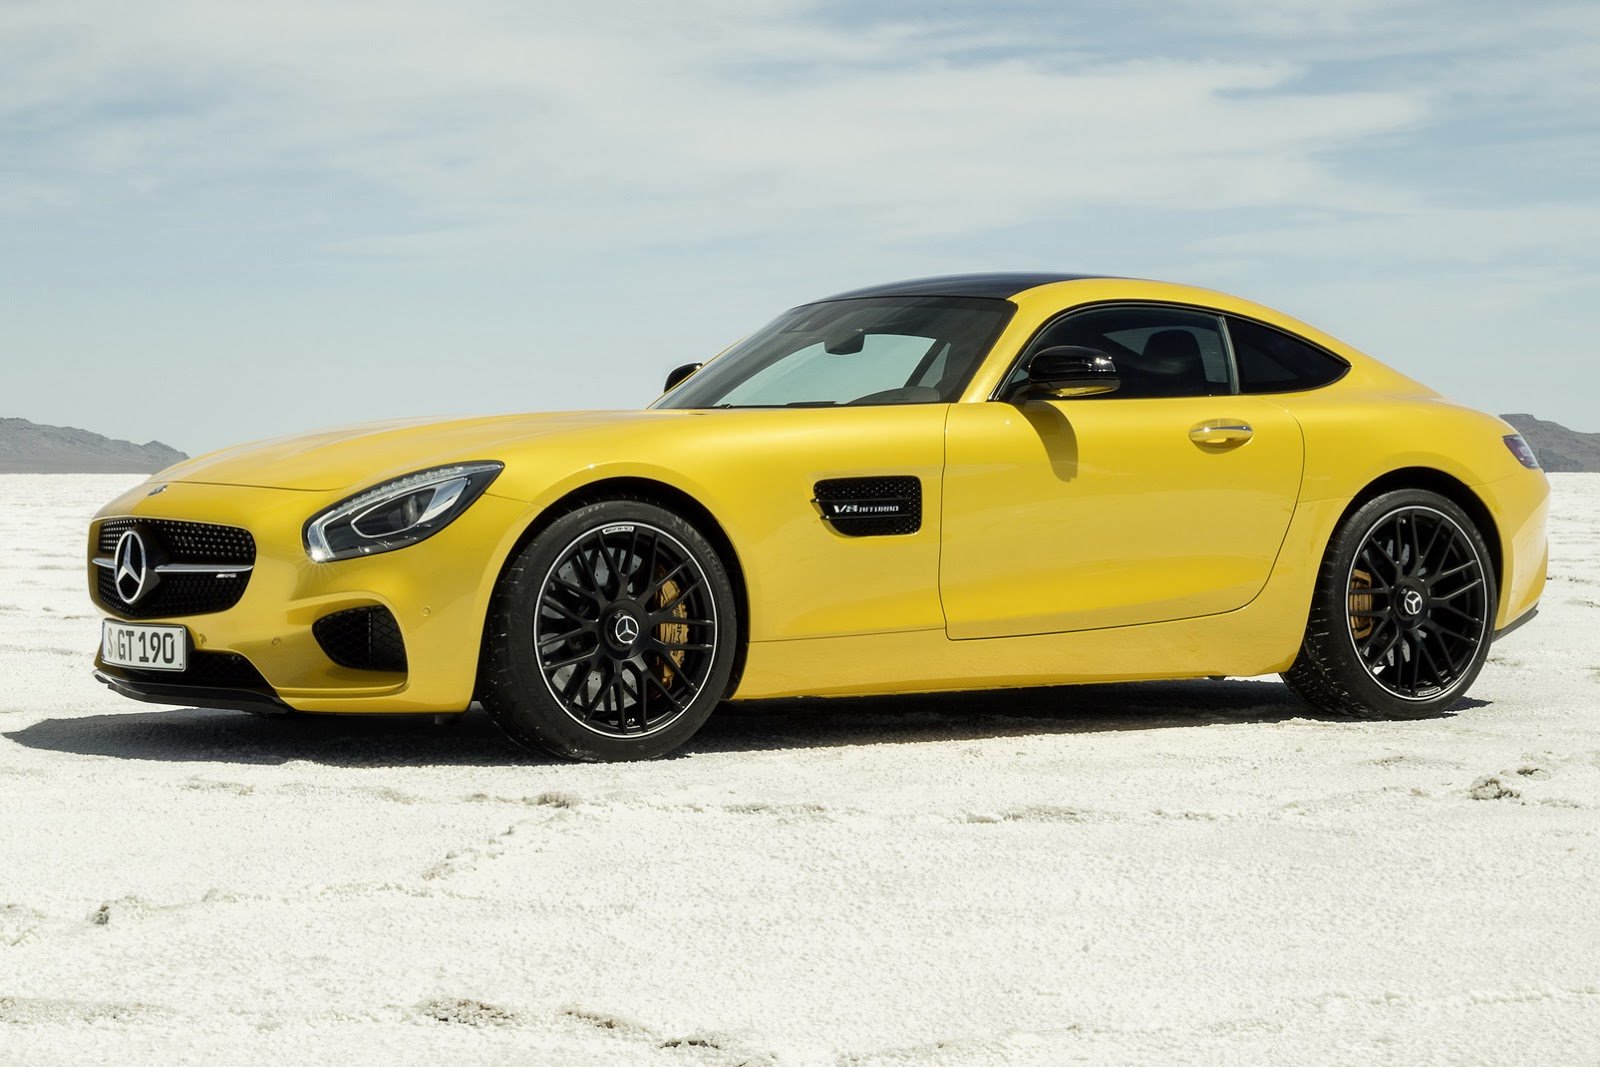 mercedes, Amg, Gt, New, Supercars, Coupe, 2015 Wallpaper